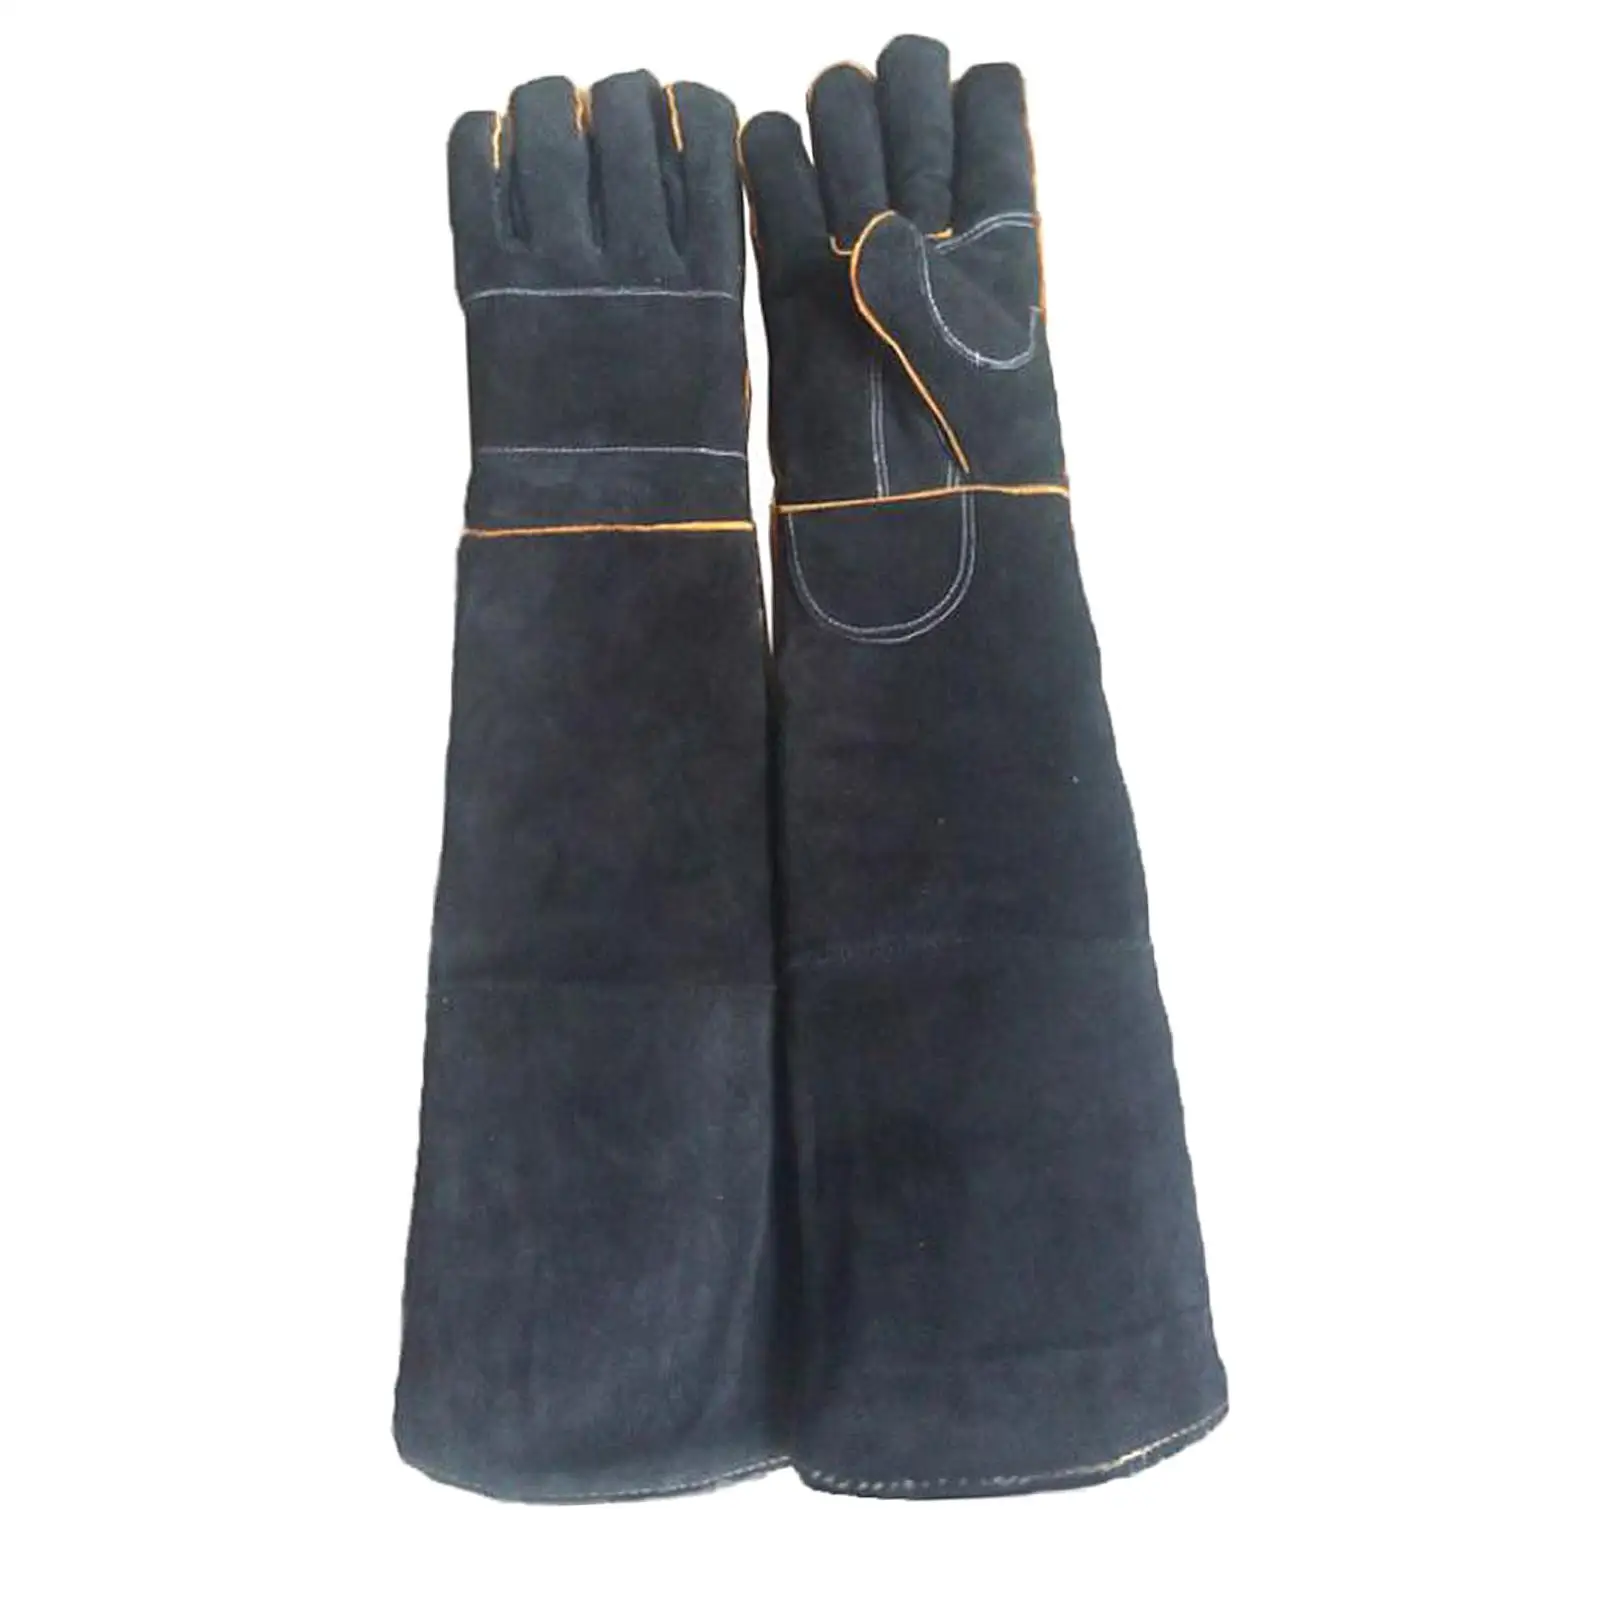 Animal Handling s  Thickened Cowhide , Double Leather Finger s & Backs for  , /Wear/Tear Resistance 60cm